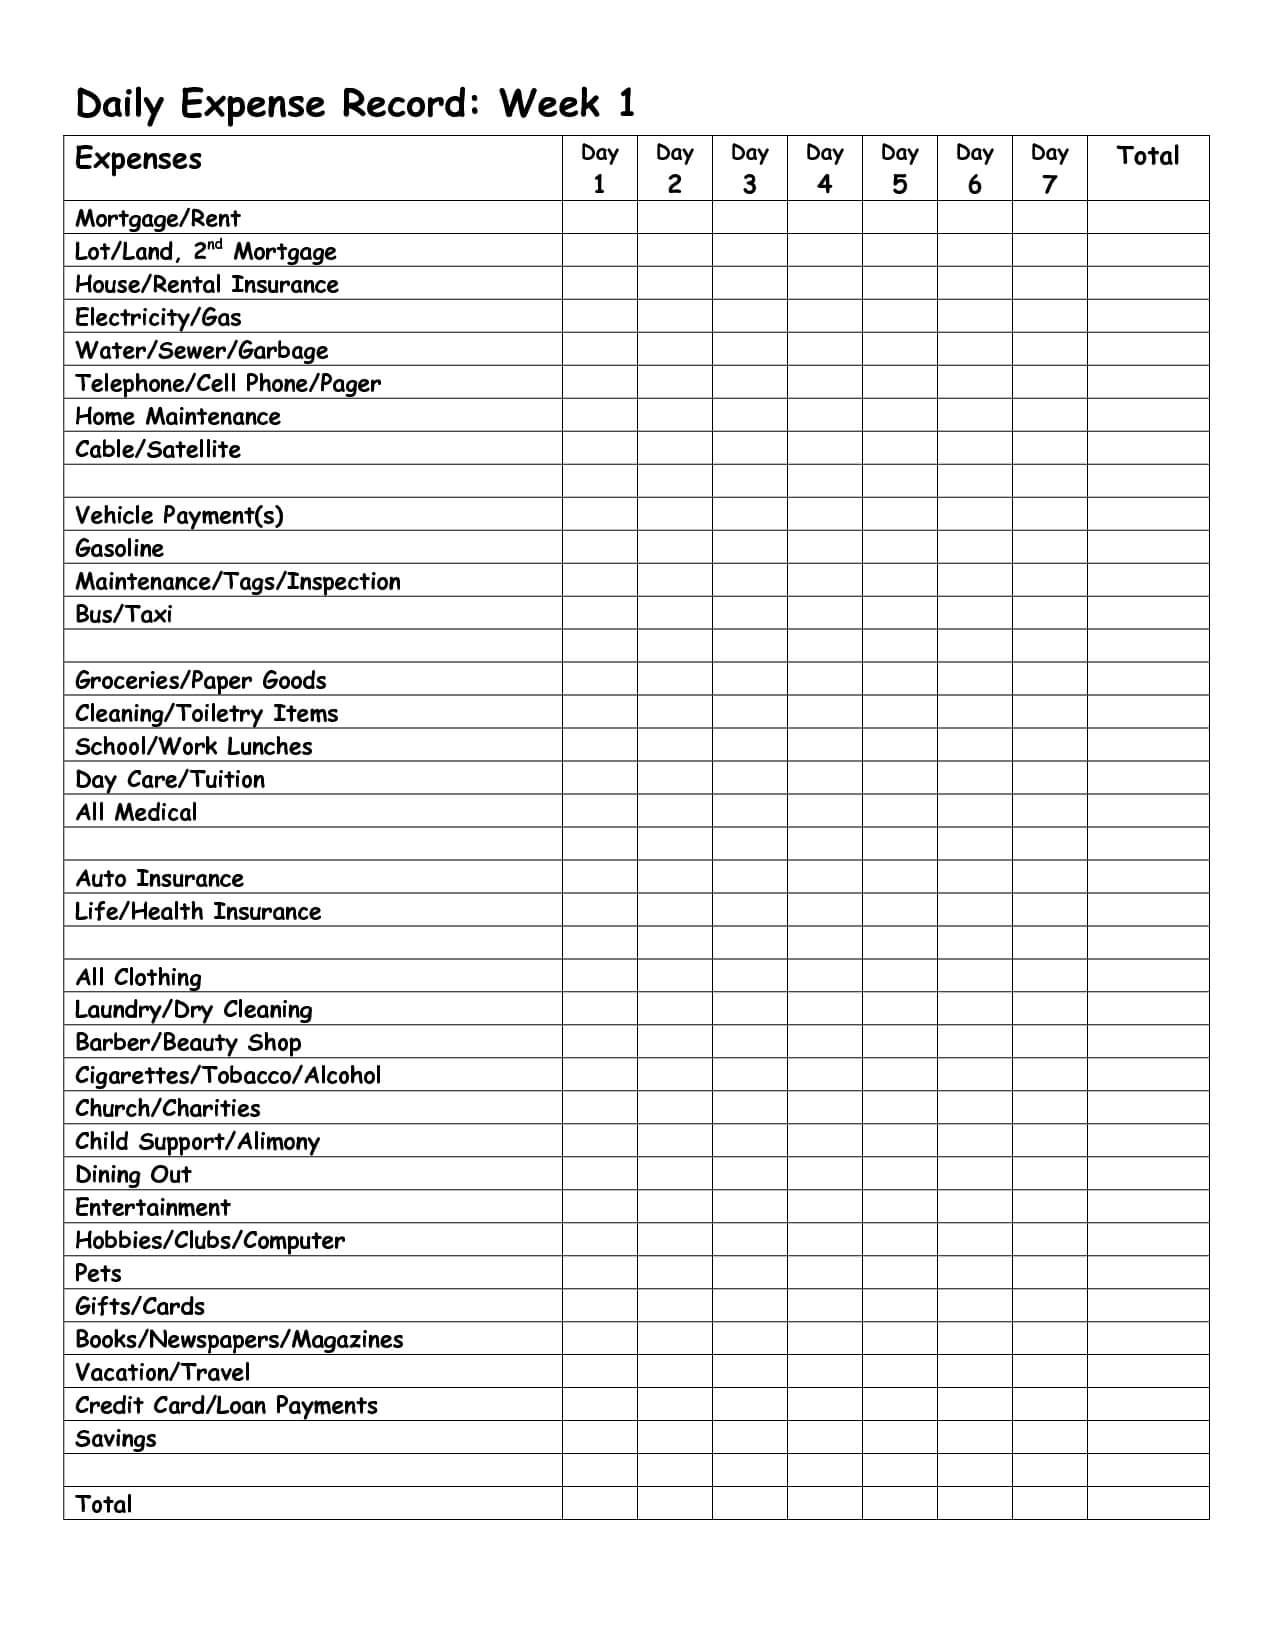 Monthly Expense Report Template | Daily Expense Record Week Throughout Shop Report Template